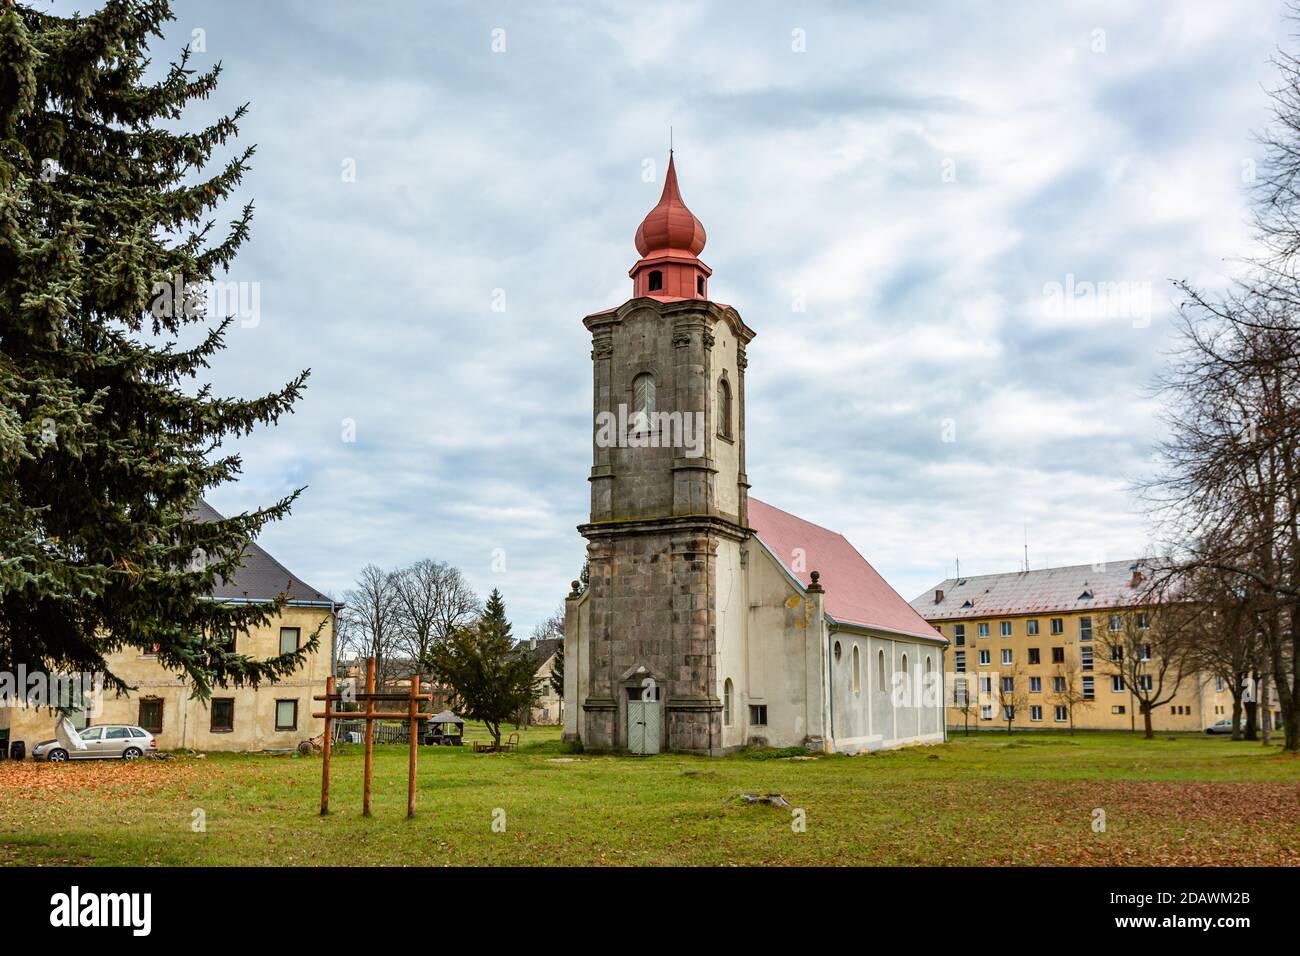 Nova Ves / Czech Republic - November 15 2020: View of the roman catholic church of the Most Holy Trinity built in the 18th century standing in a park. Stock Photo